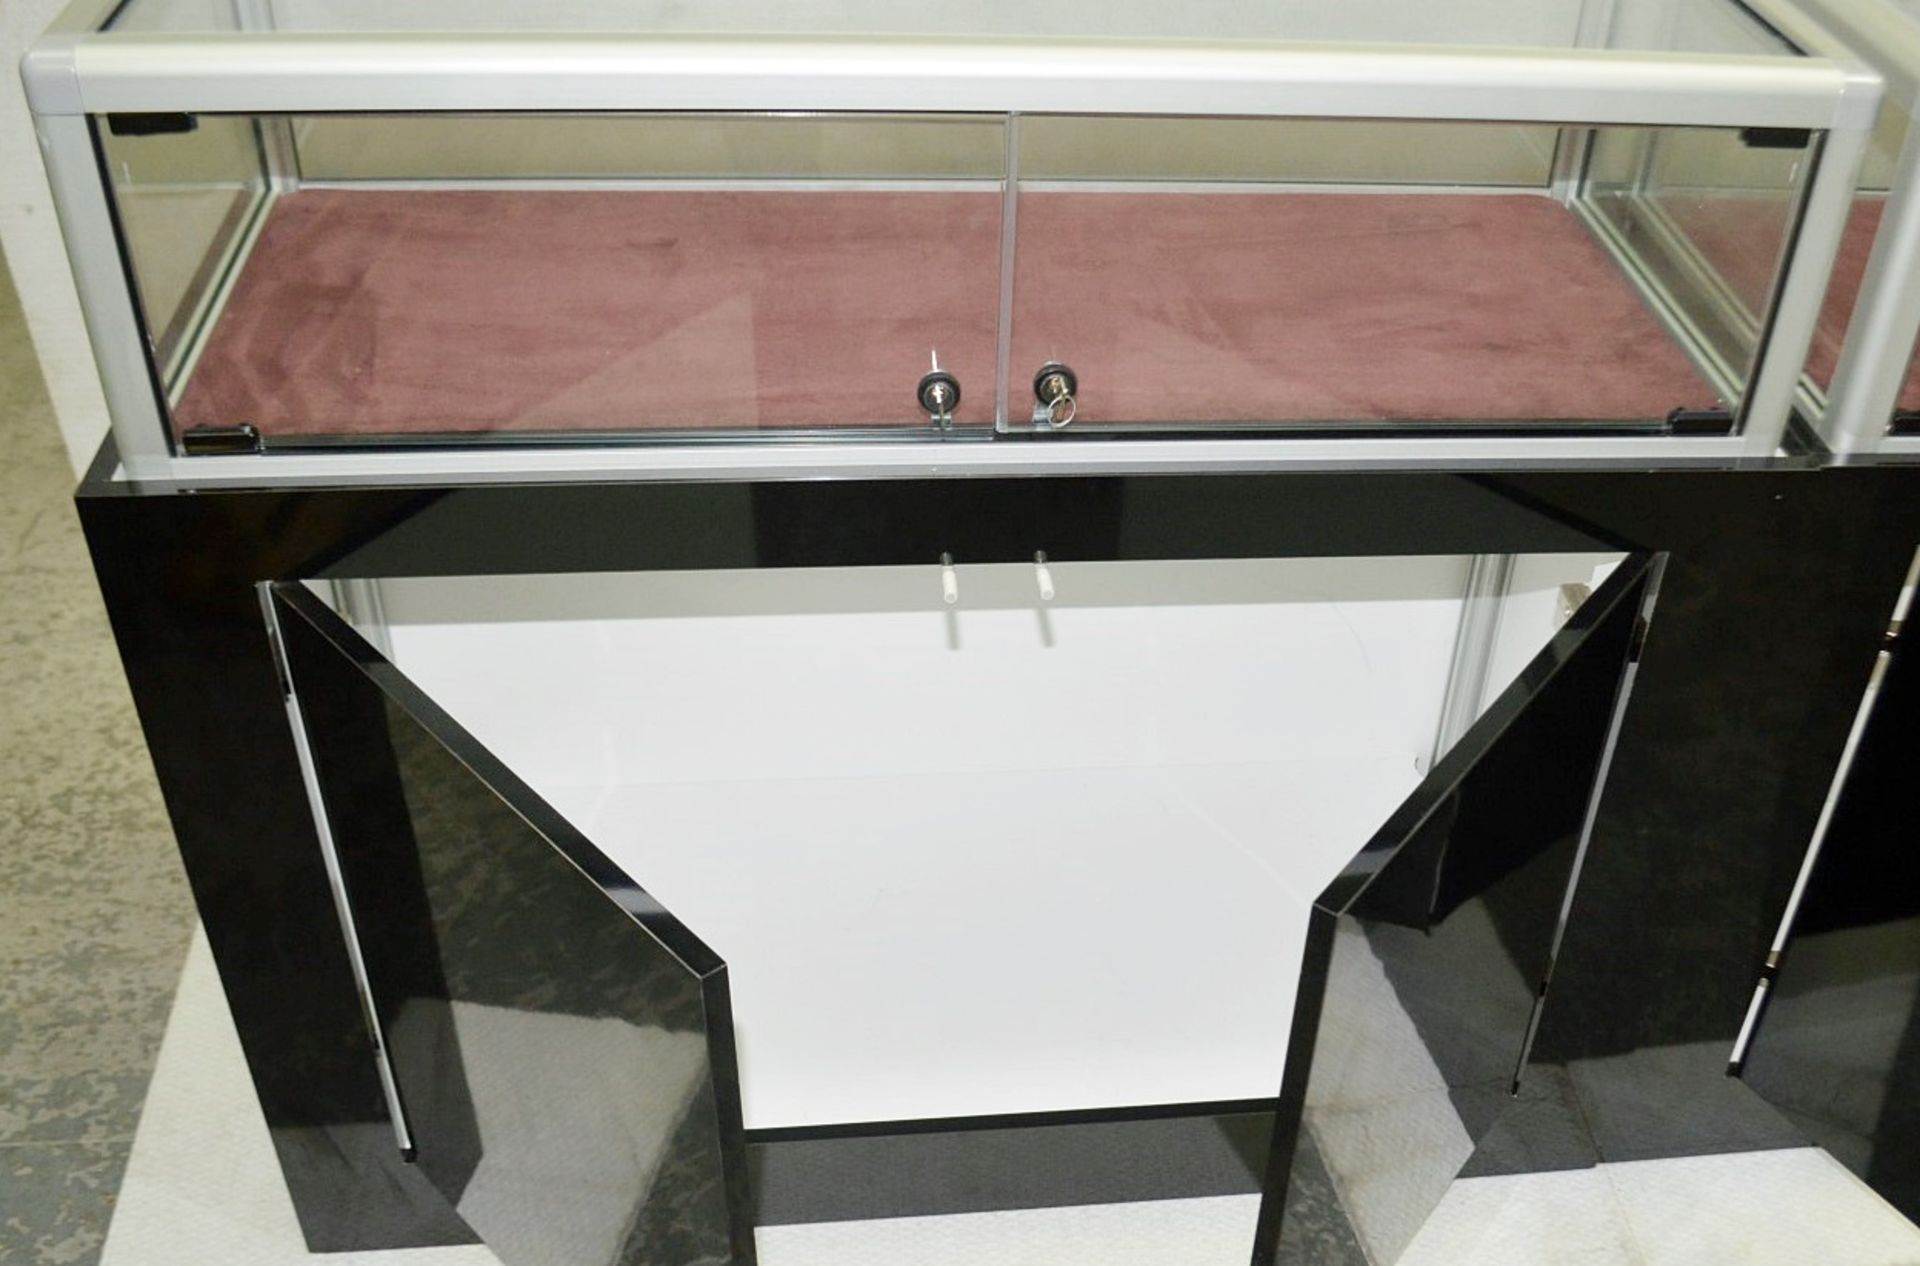 Pair Of Retail Counters With Lockable Display Cabinets And Undercounter Storage - Image 6 of 9